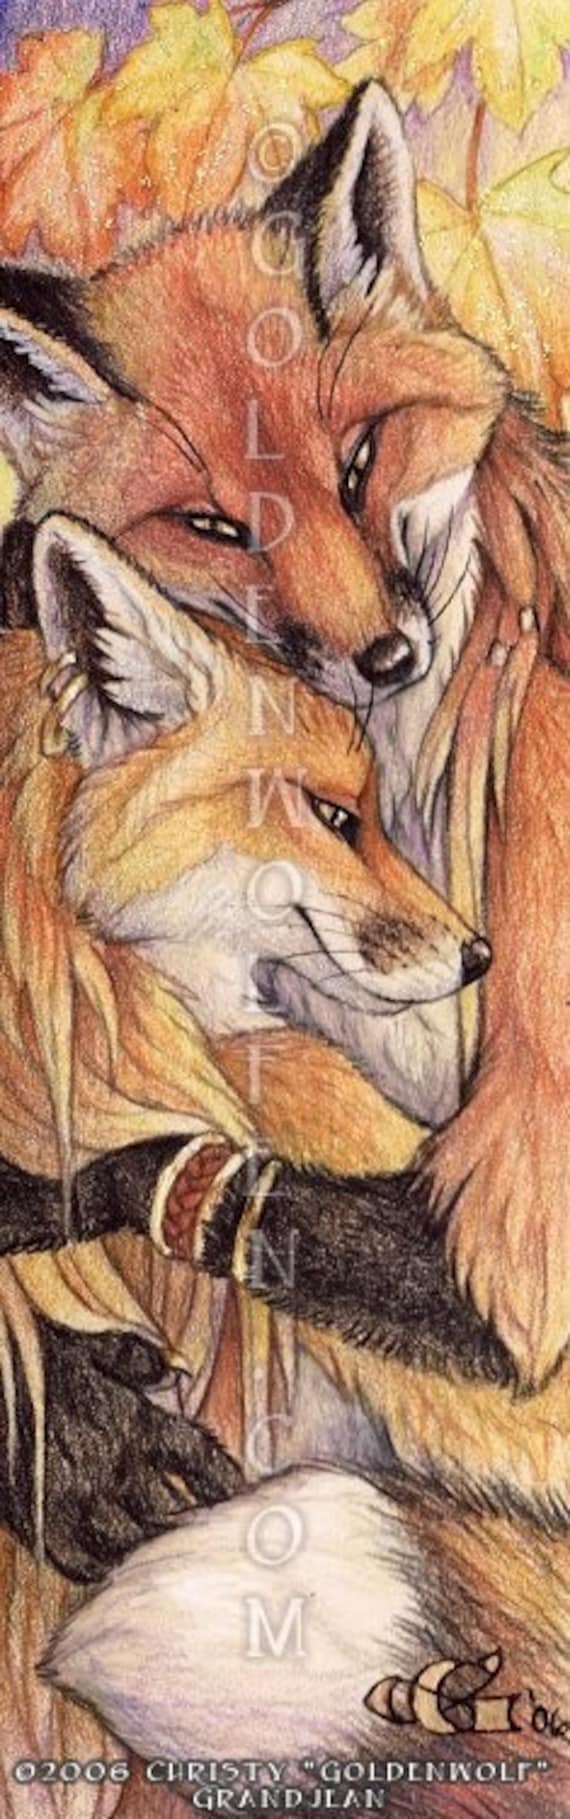 Fixed foxy  Painting, Art, Colored pencils